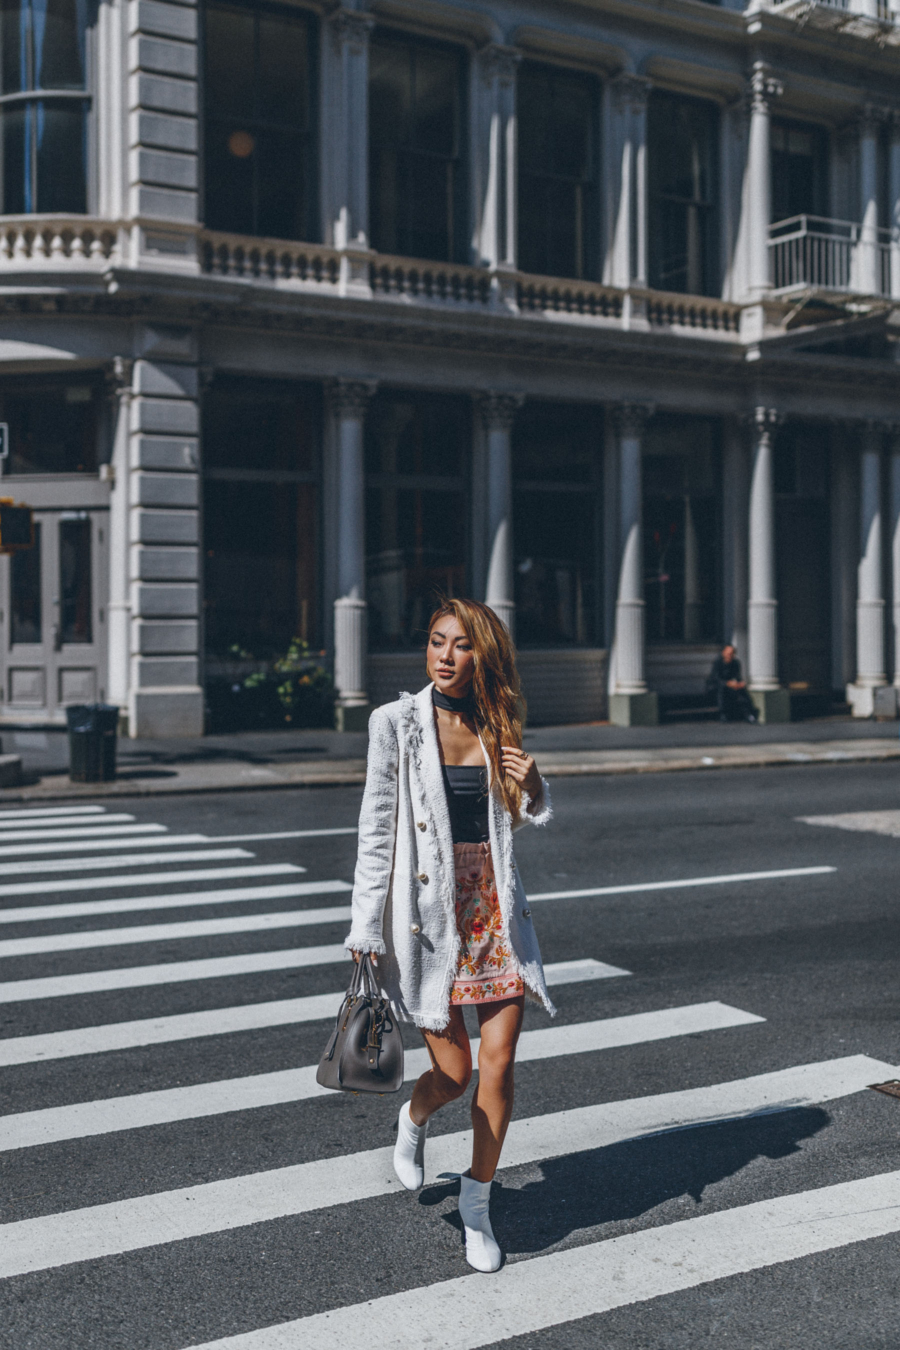 SoHo Streetstyle - Best Places To Take Photos in New York // NotJessFashion.com